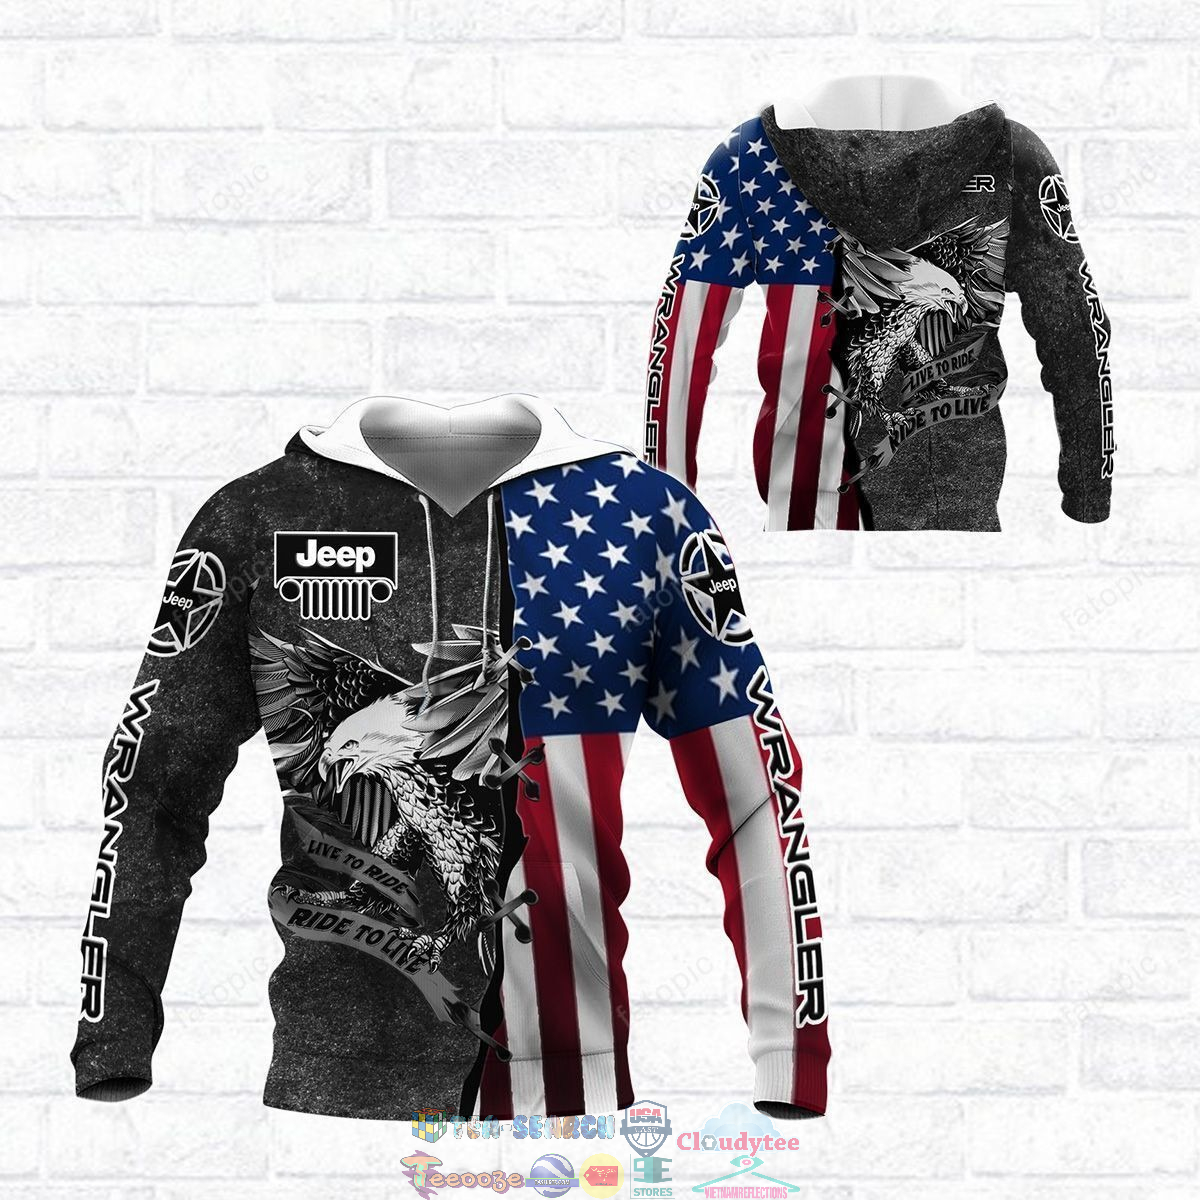 Jeep Wrangler Eagle American Flag ver 1 3D hoodie and t-shirt – Saleoff